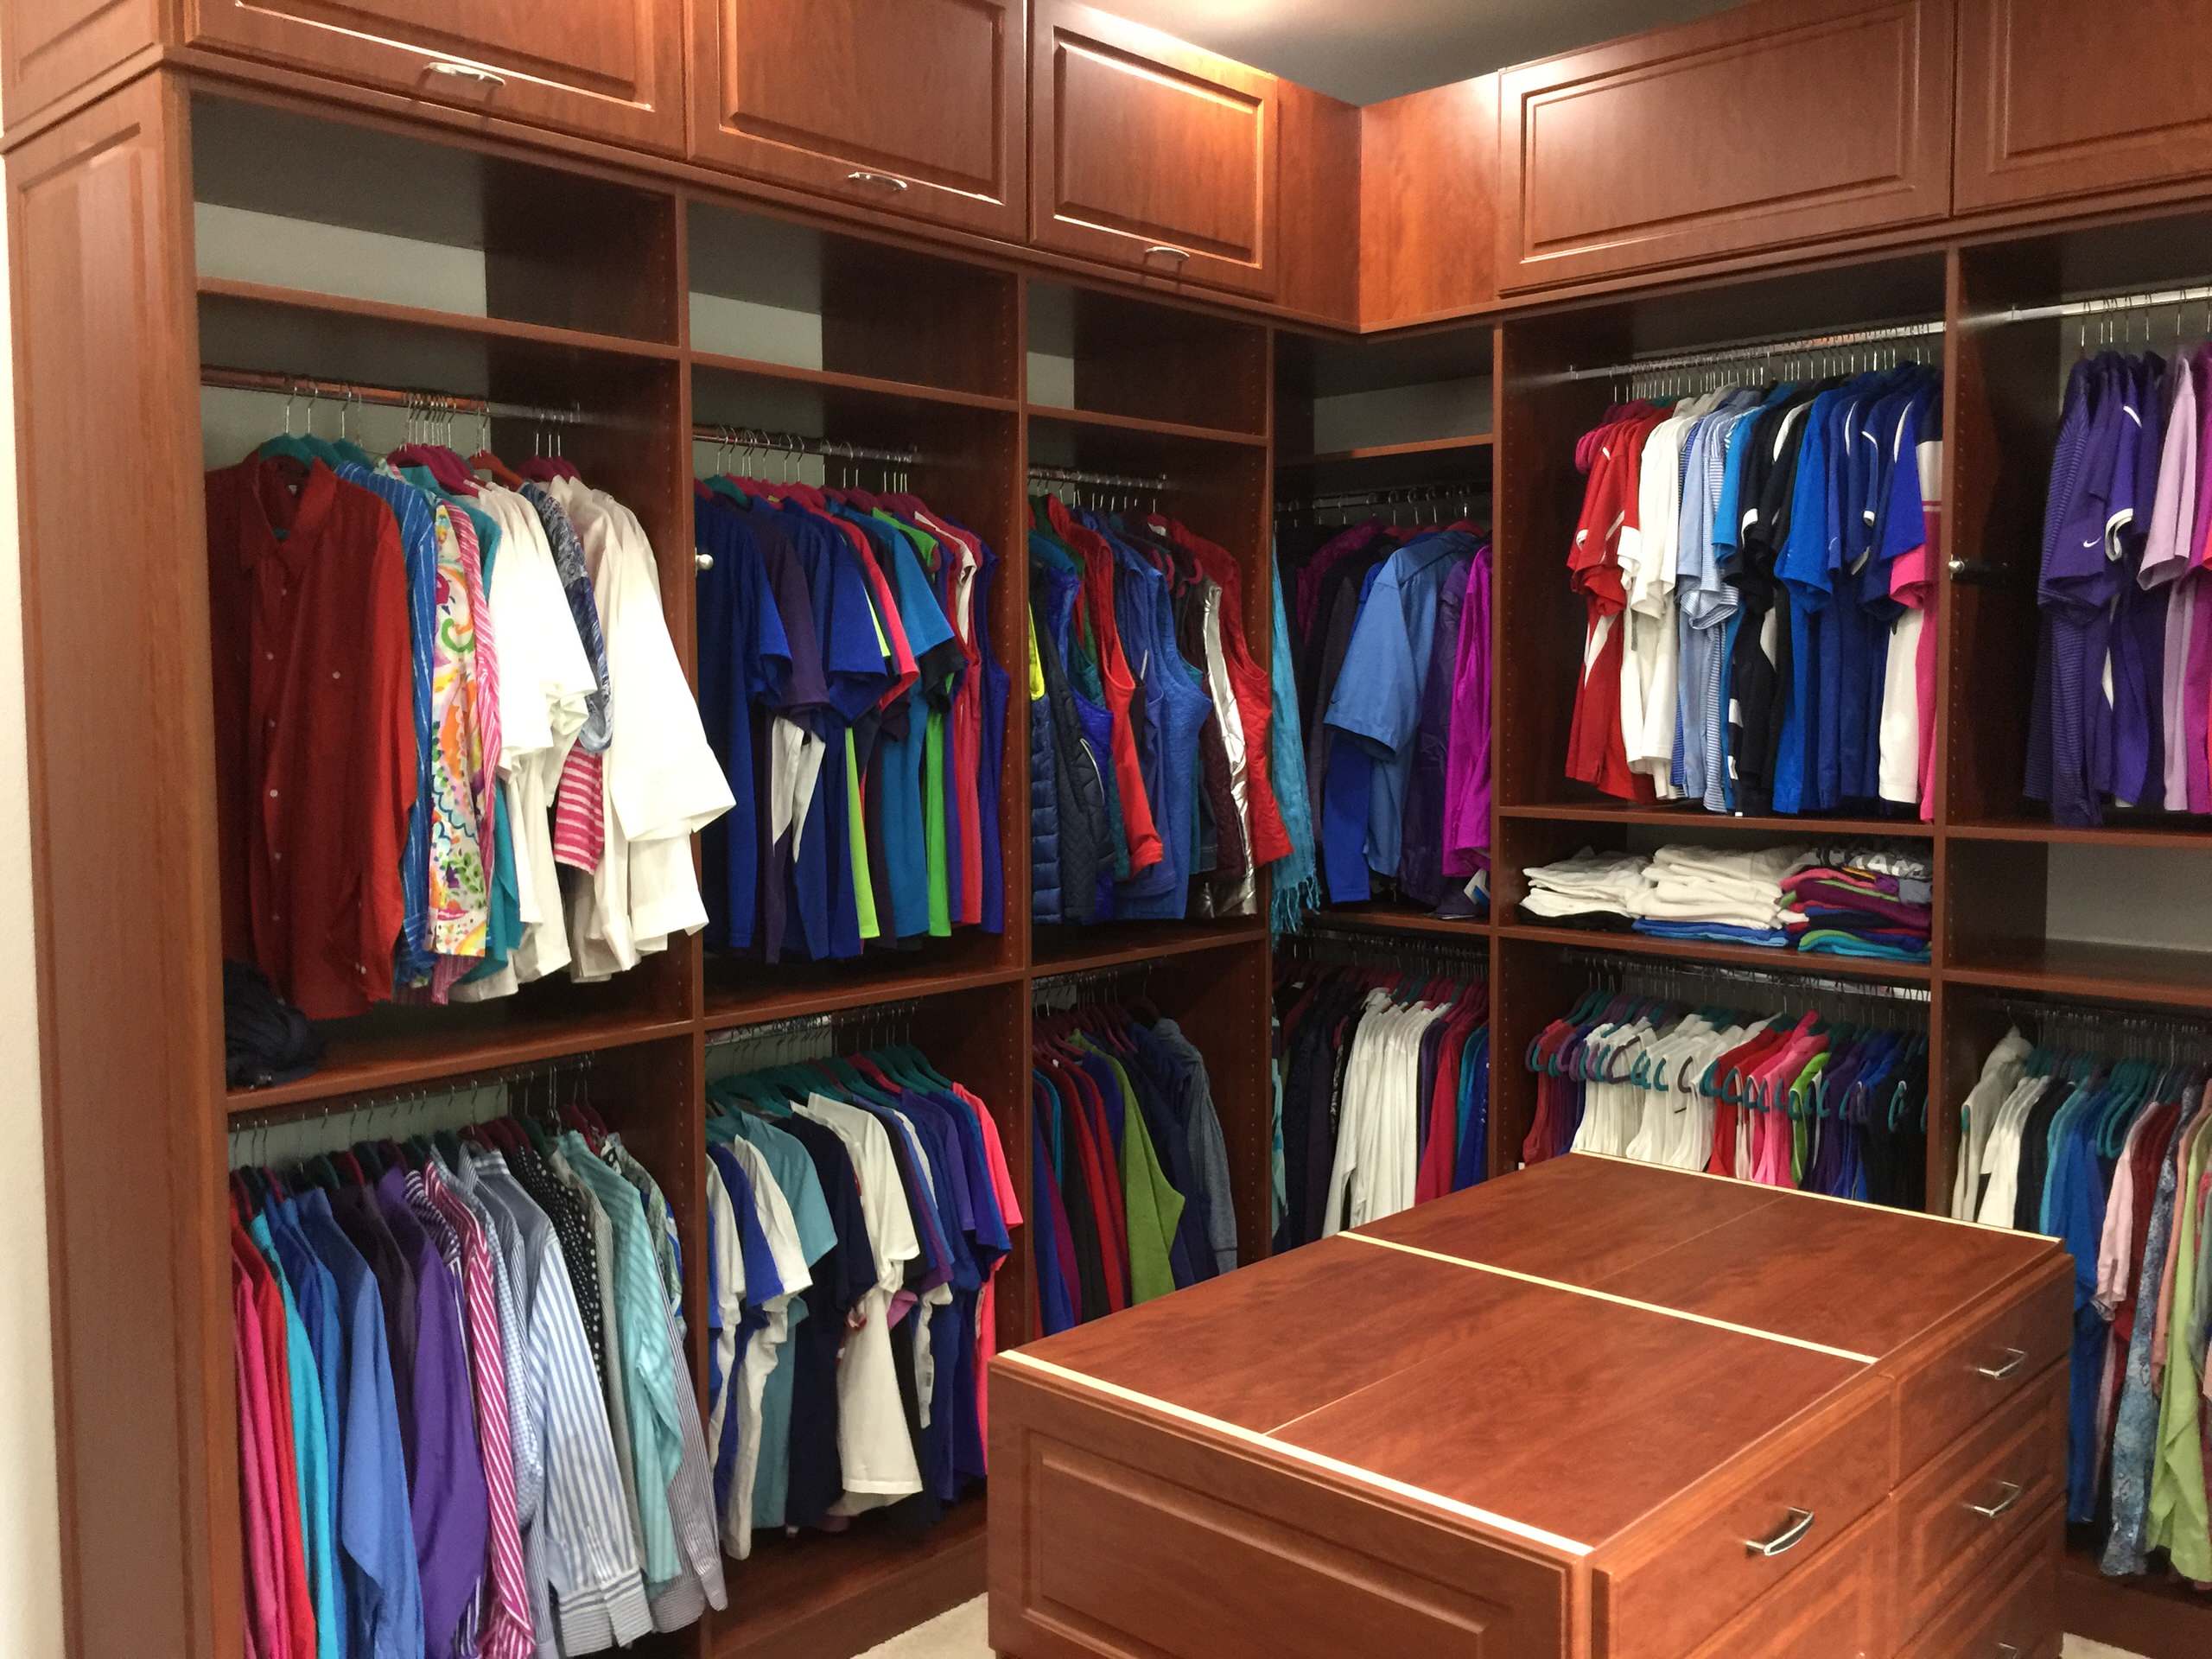 Large Walk-in Closet and Laundry Room in Balsam, NC